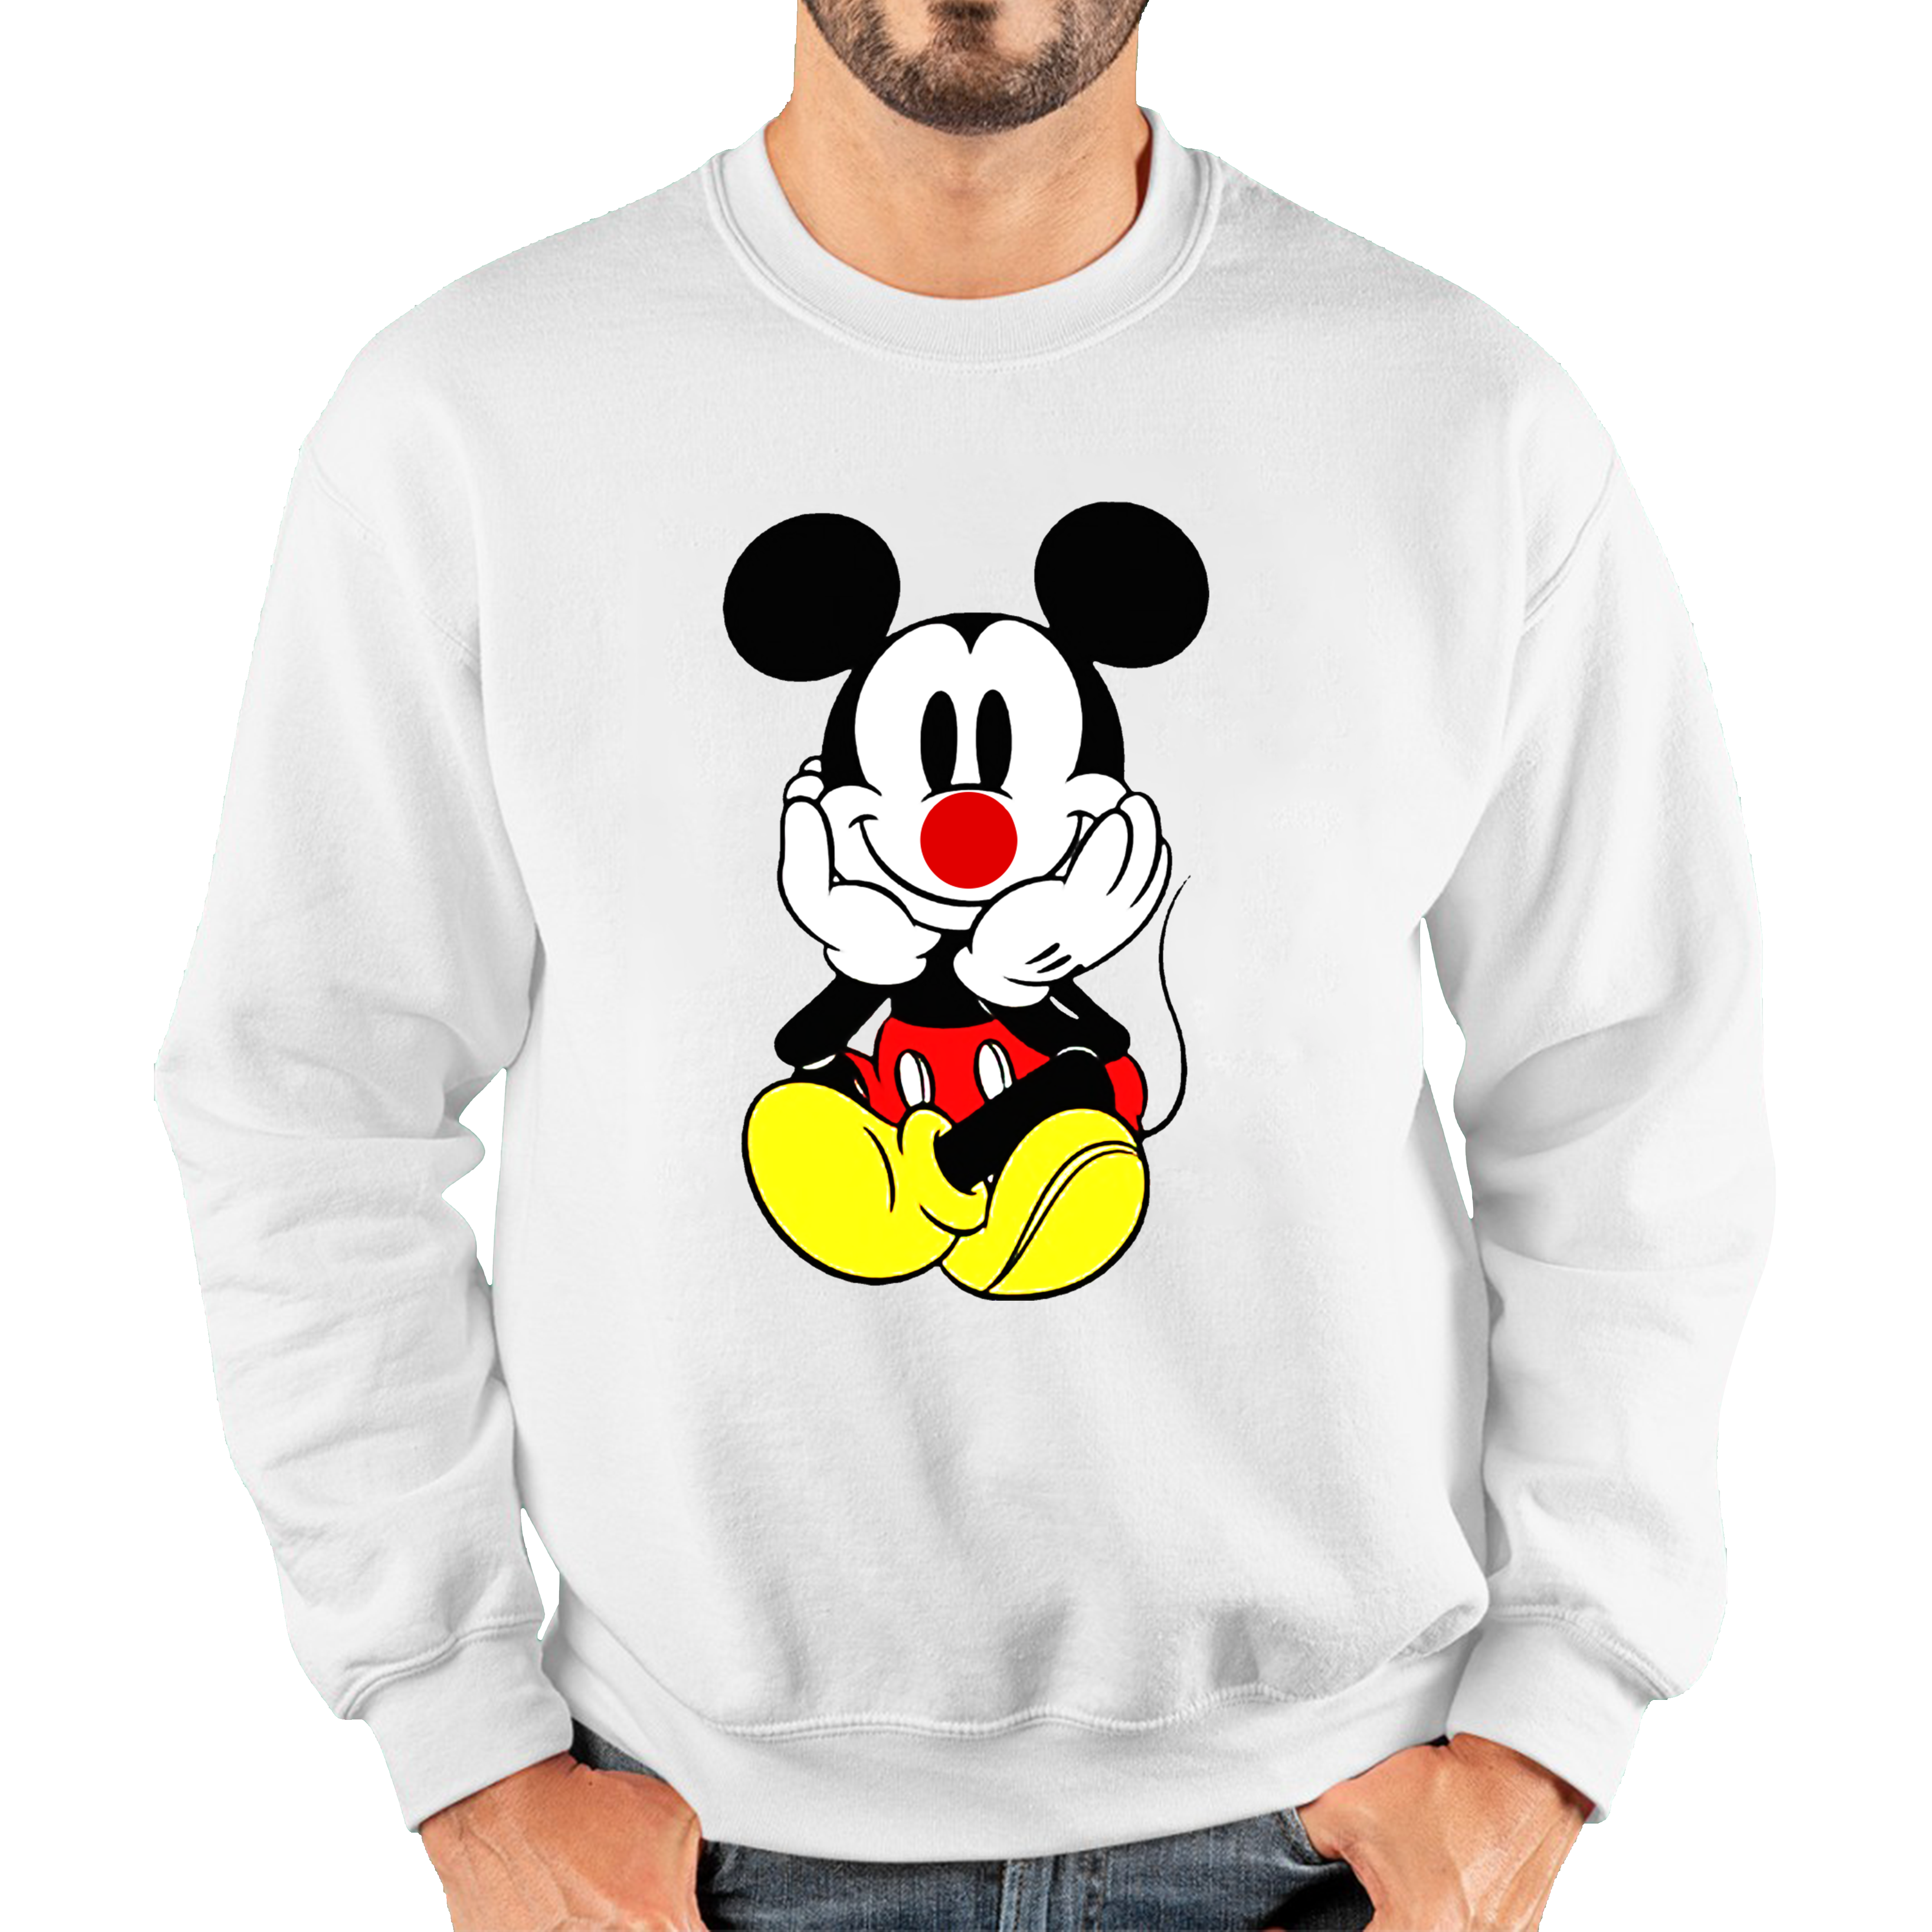 Mickey Mouse Red Nose Day Adult Sweatshirt. 50% Goes To Charity